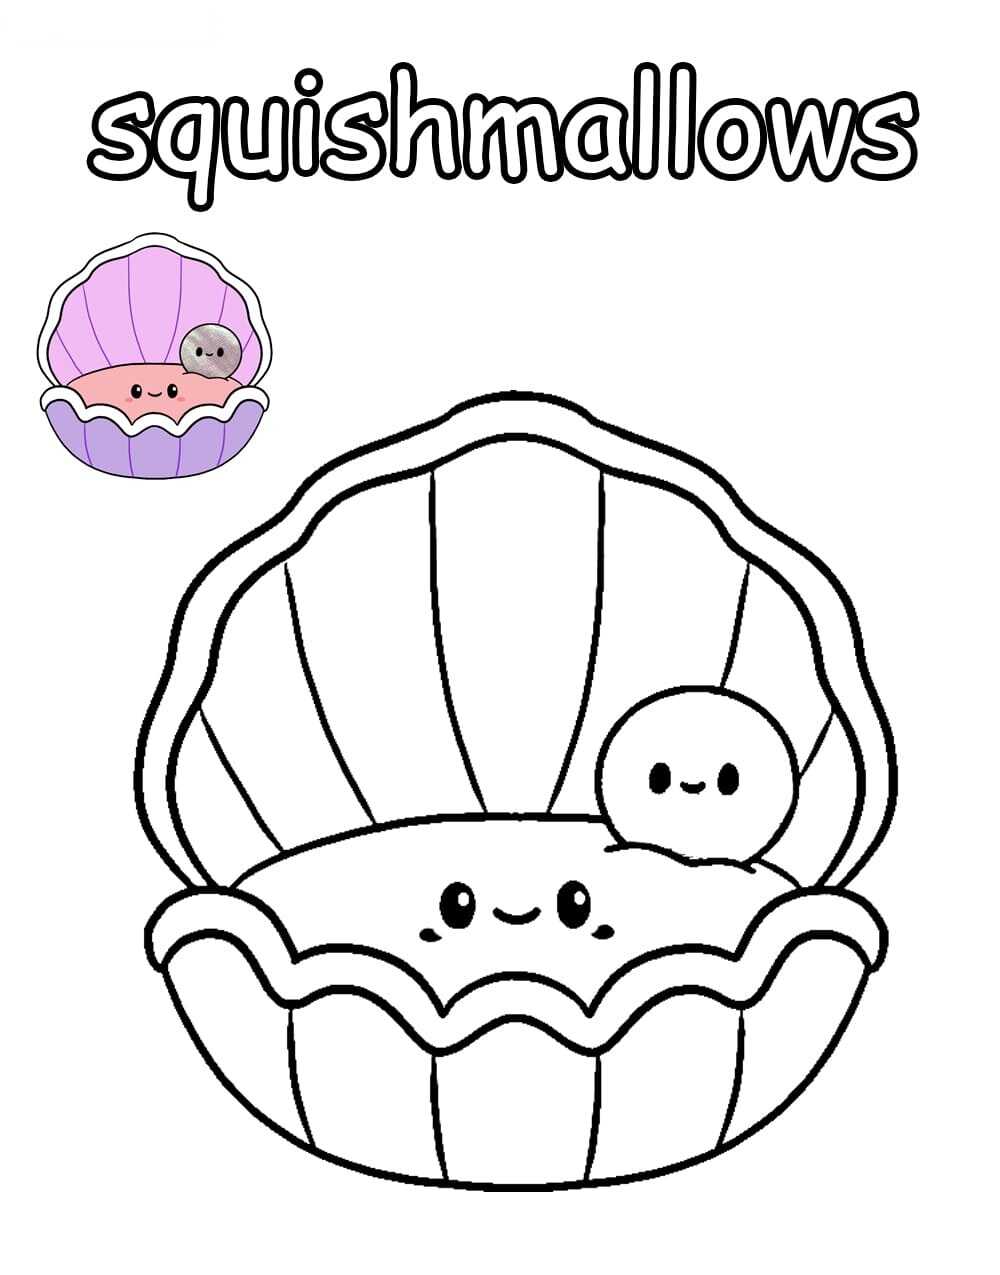 Squishmallow Pearl in the Shell Coloring Pages - Squishmallow Coloring Pages  - Coloring Pages For Kids And Adults